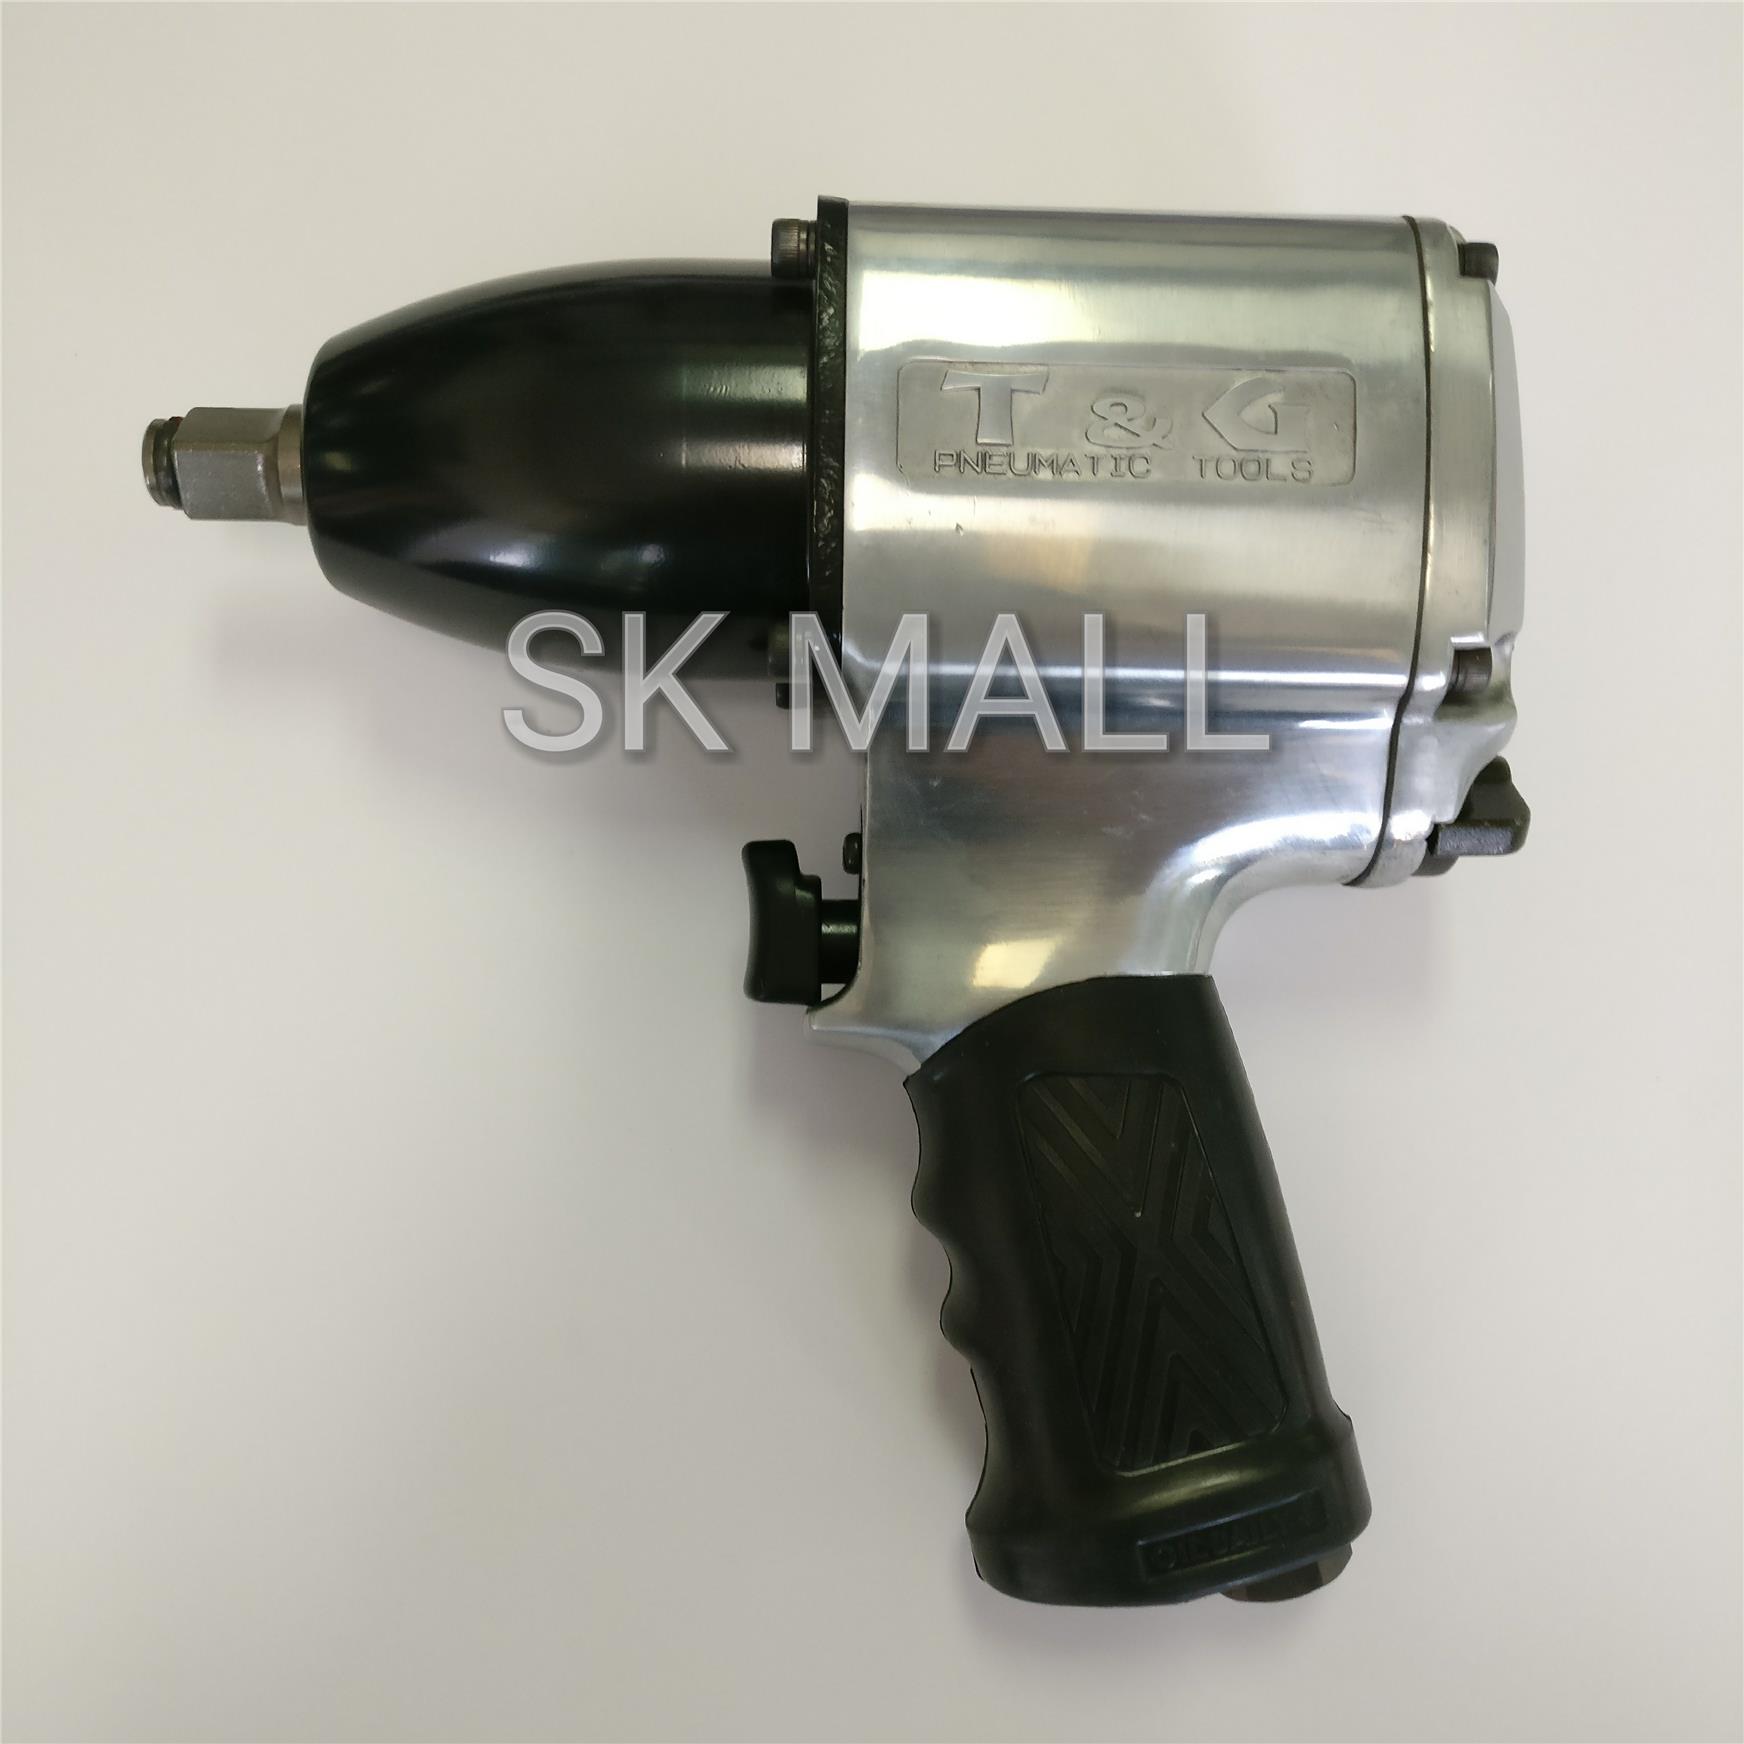 T&G Pneumatic Tools JAPAN. 1/2” Drive (end 5/6/2018 3:15 PM)